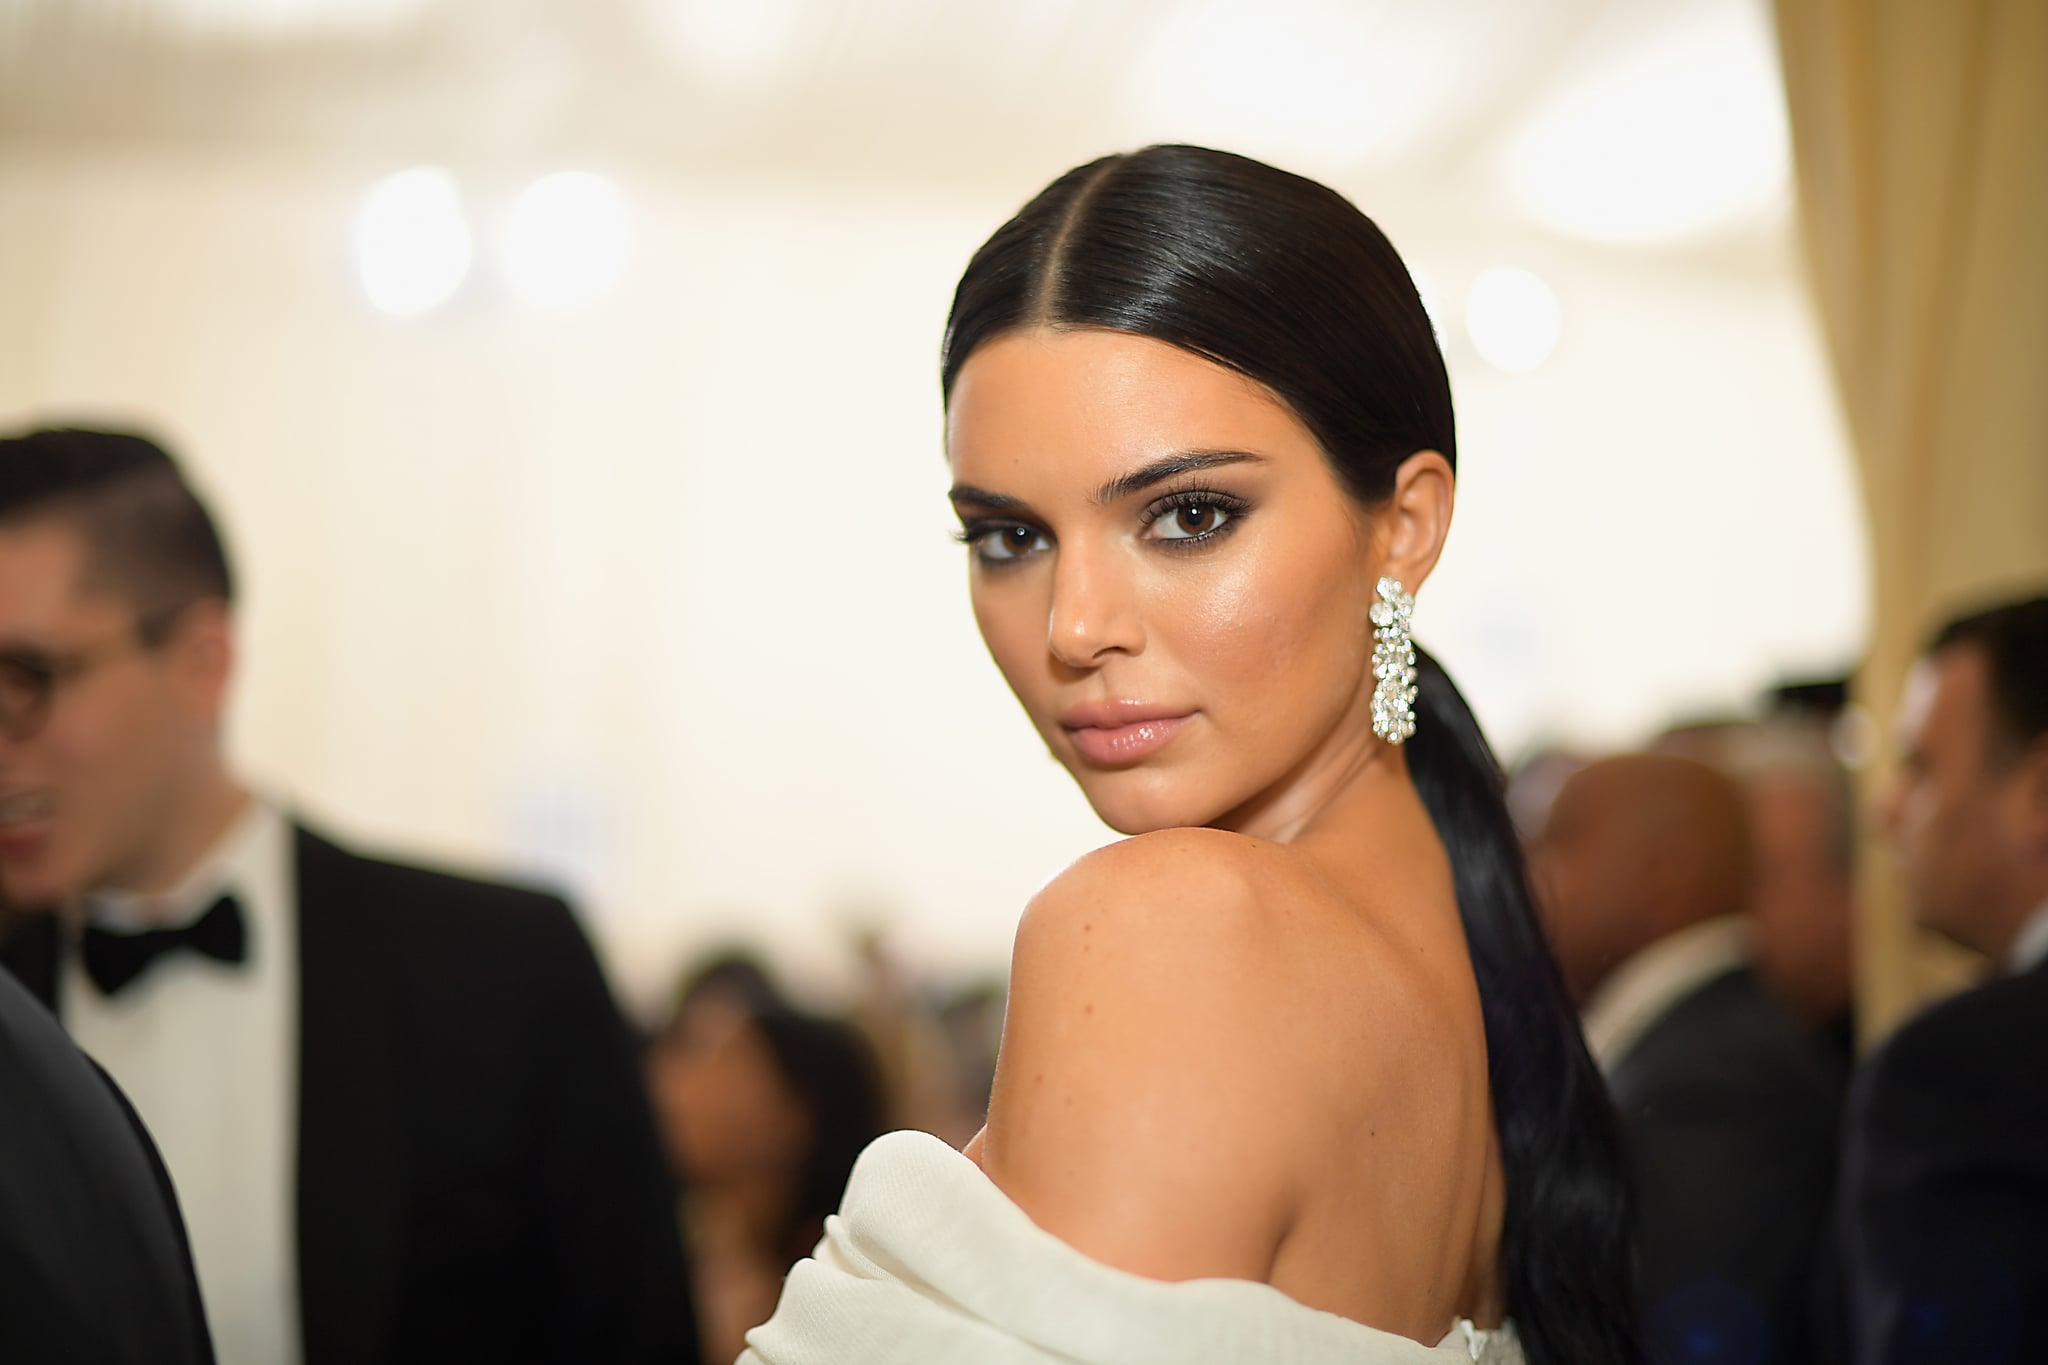 NEW YORK, NY - MAY 07: Kendall Jenner attends the Heavenly Bodies: Fashion & The Catholic Imagination Costume Institute Gala at The Metropolitan Museum of Art on May 7, 2018 in New York City.  (Photo by Matt Winkelmeyer/MG18/Getty Images for The Met Museum/Vogue)